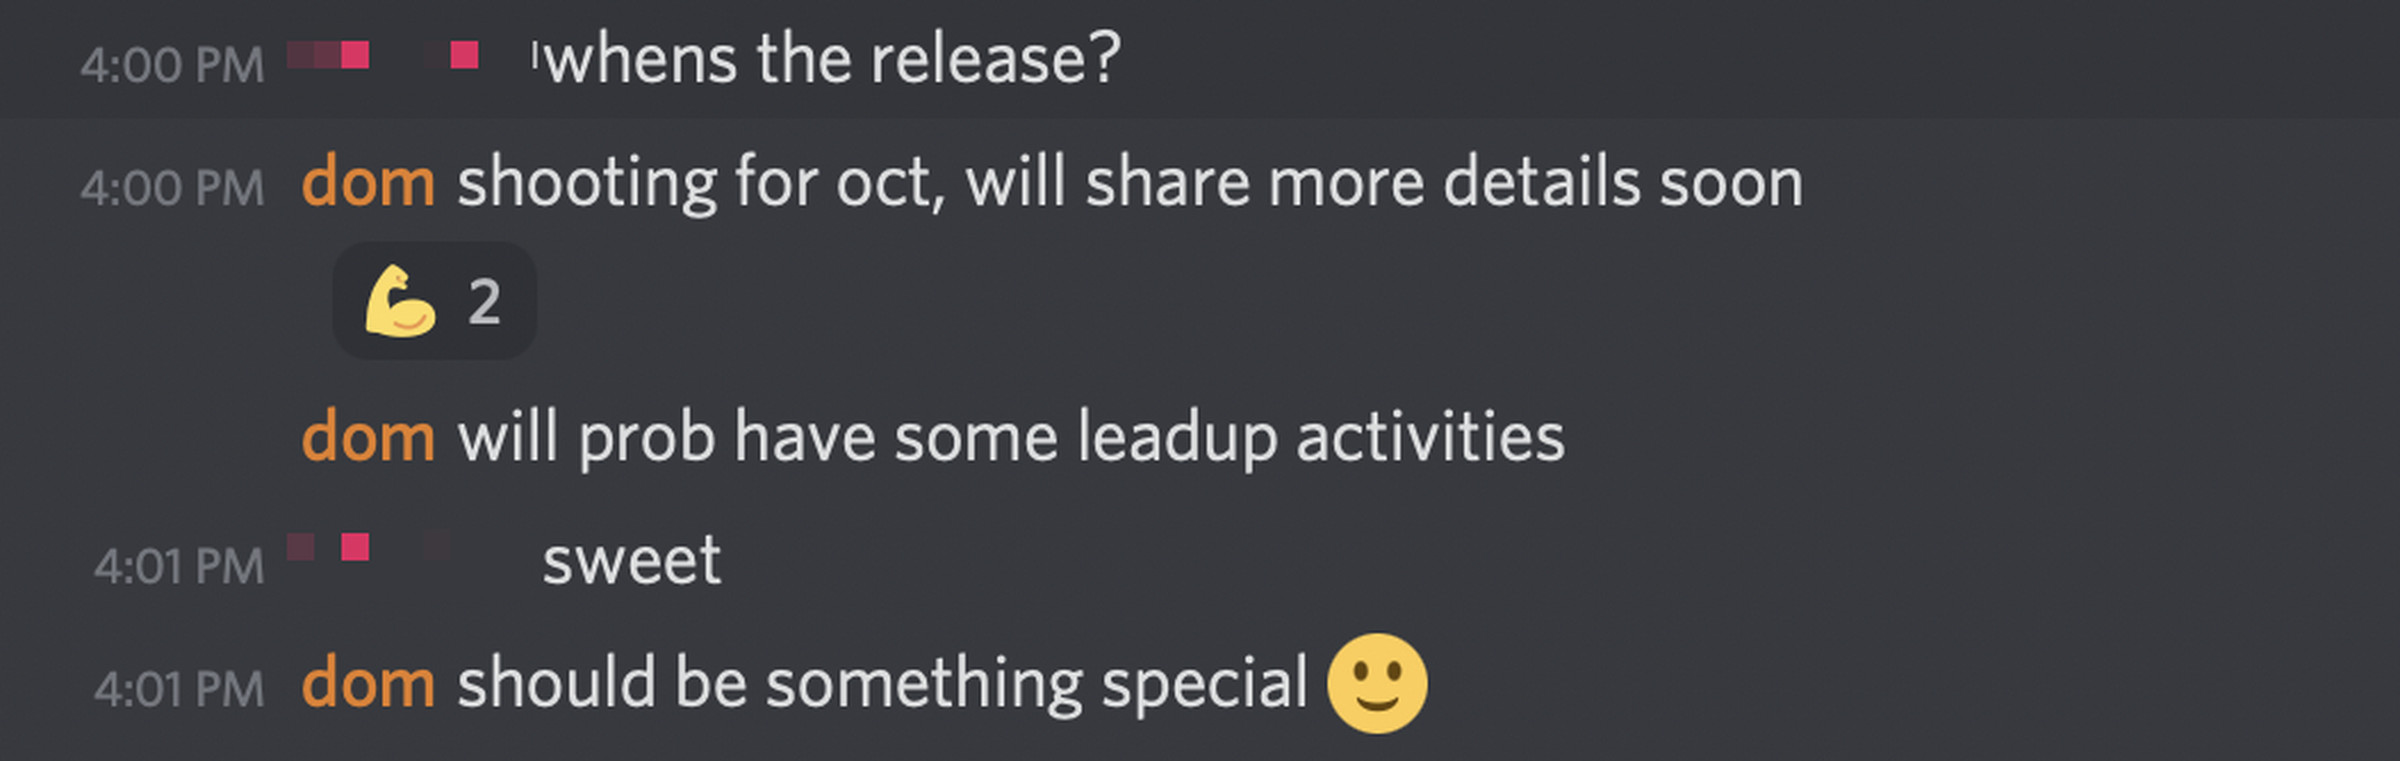 Conversation between two Discord users. User 1: When’s the release? Hofmann: Shooting for Oct, will share more details soon. Will prob have some leads activities. Should be something special (smile emoji)